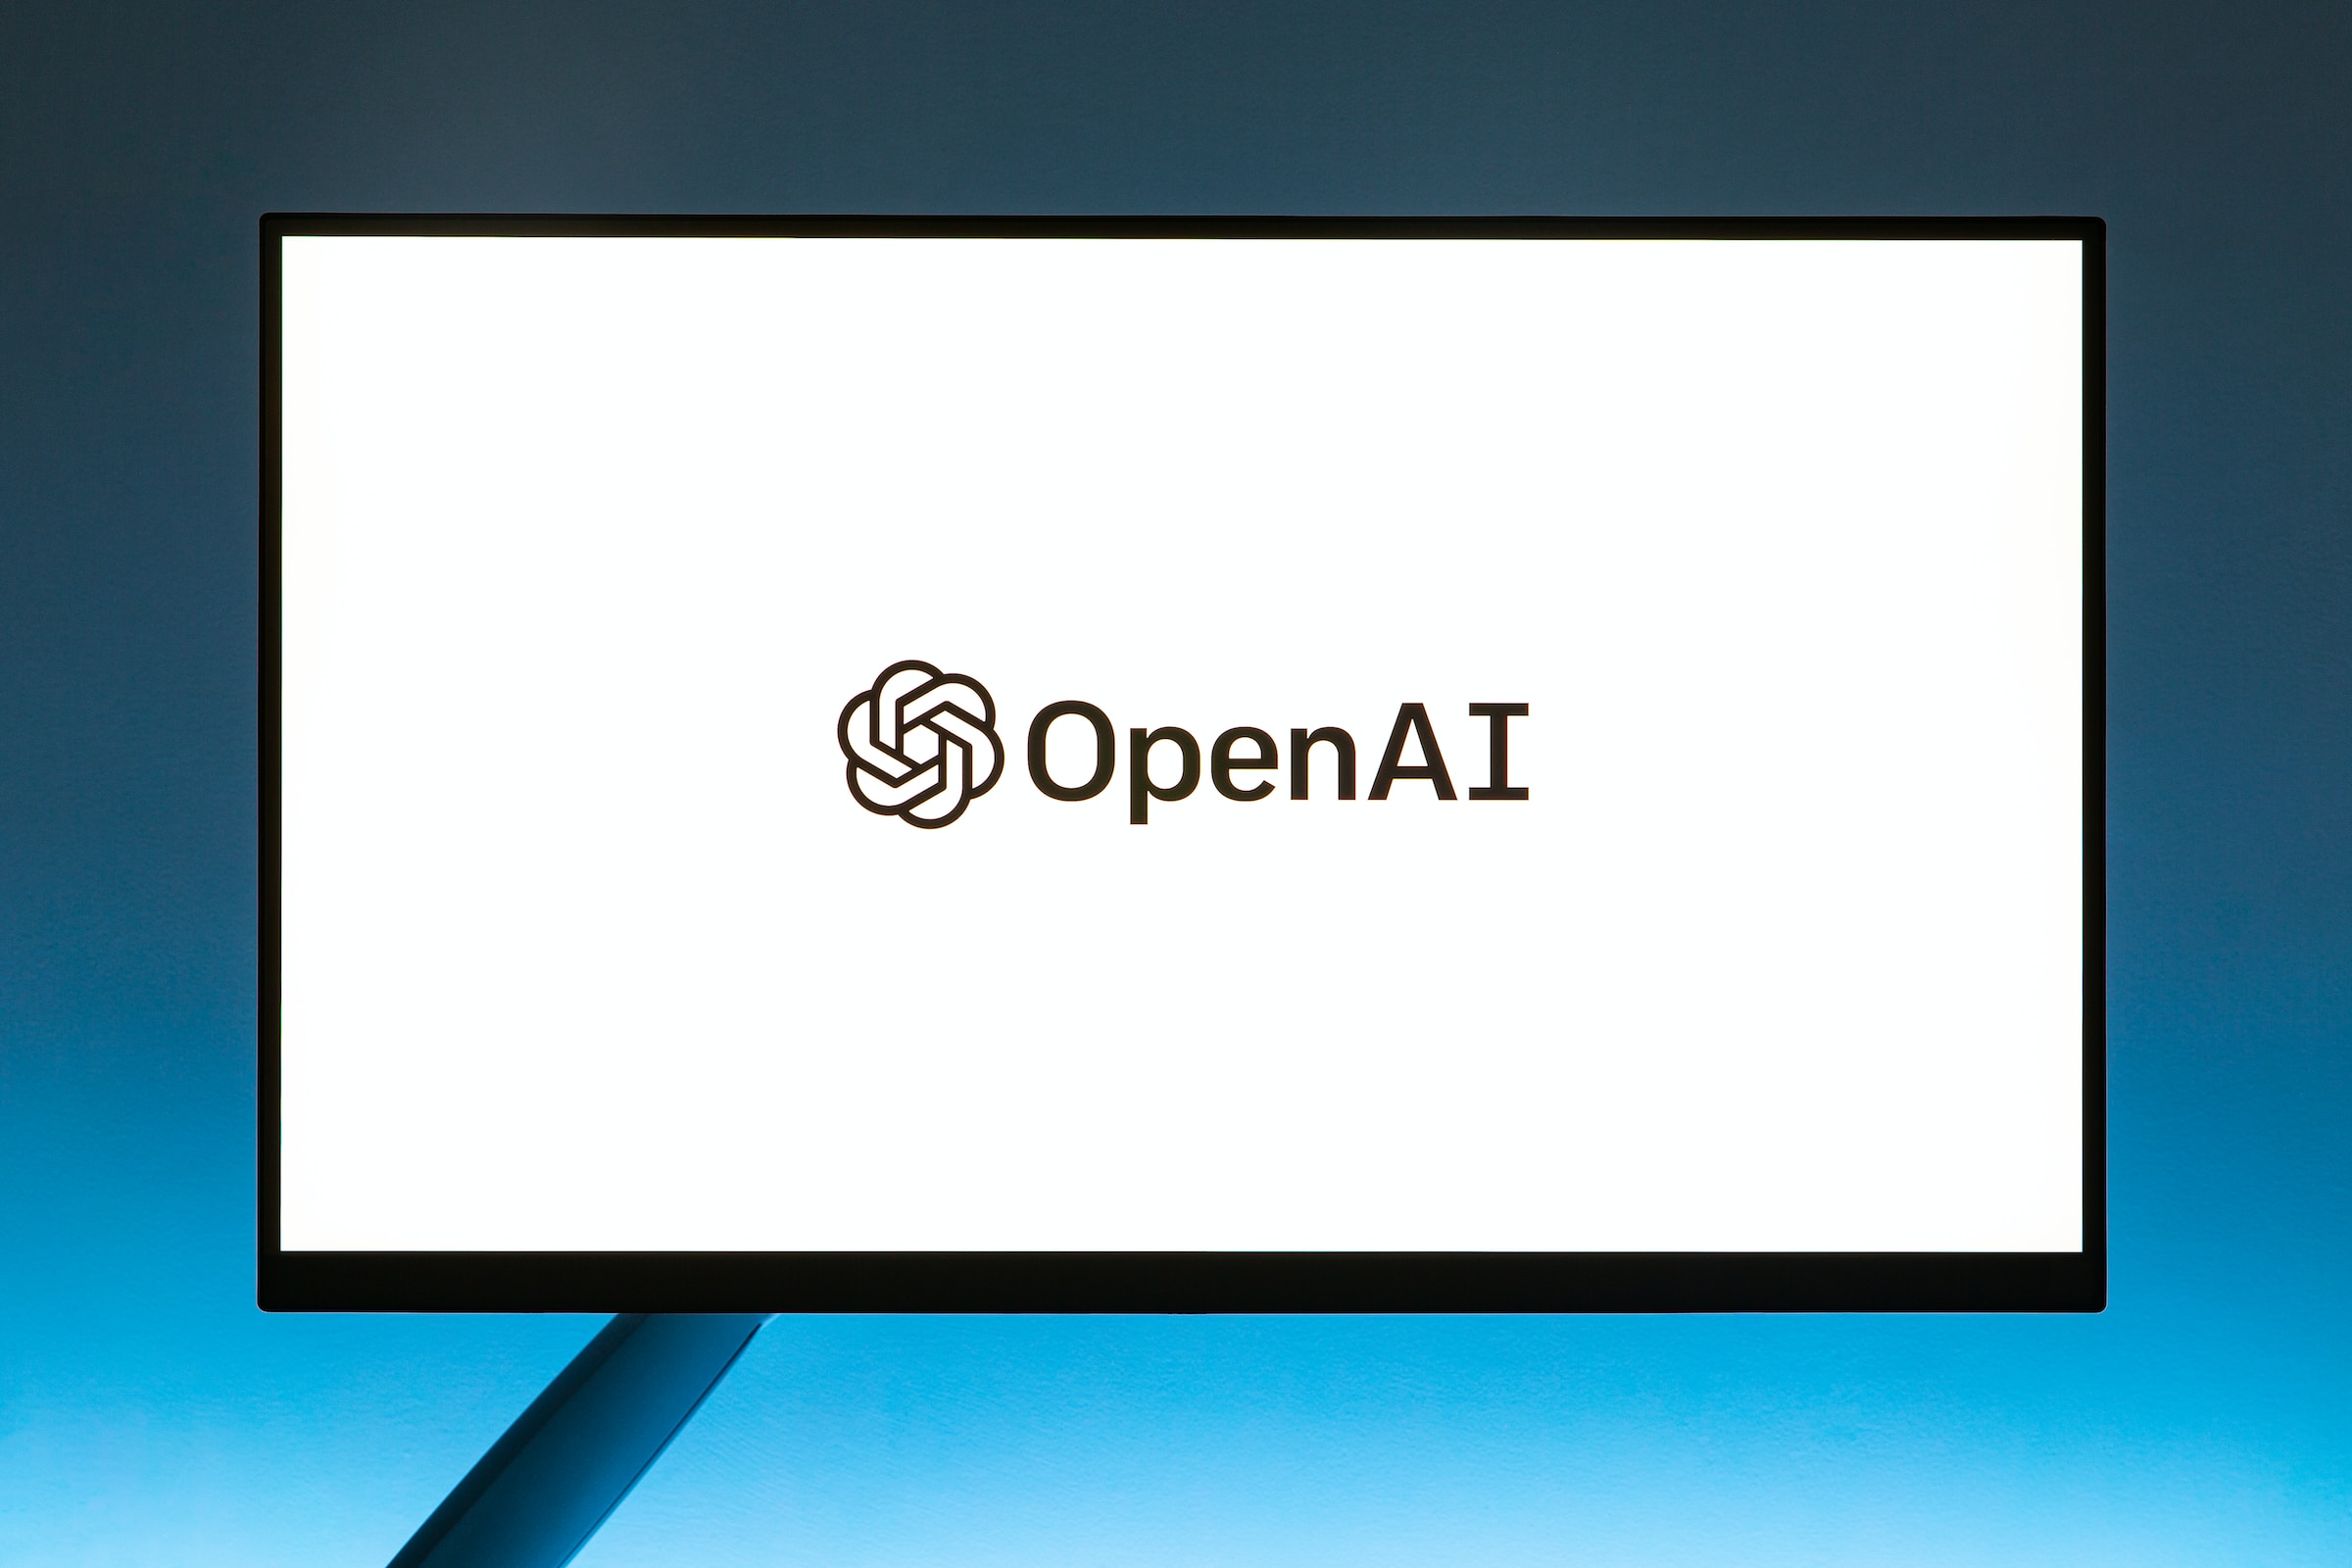 OpenAI’s first global office will be in London